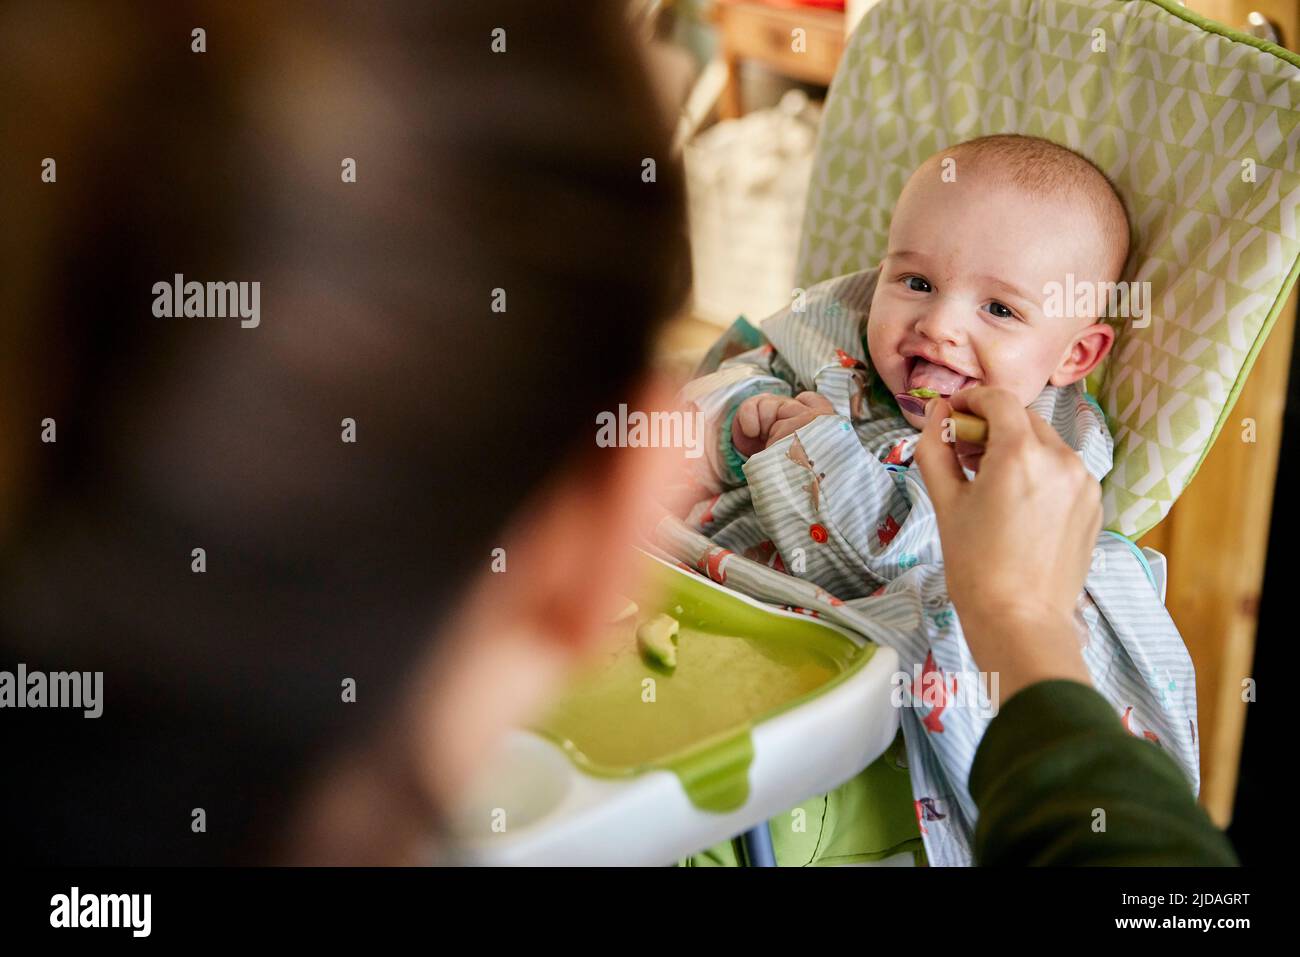 Smiling six month old baby being fed by mother in high chair Stock Photo